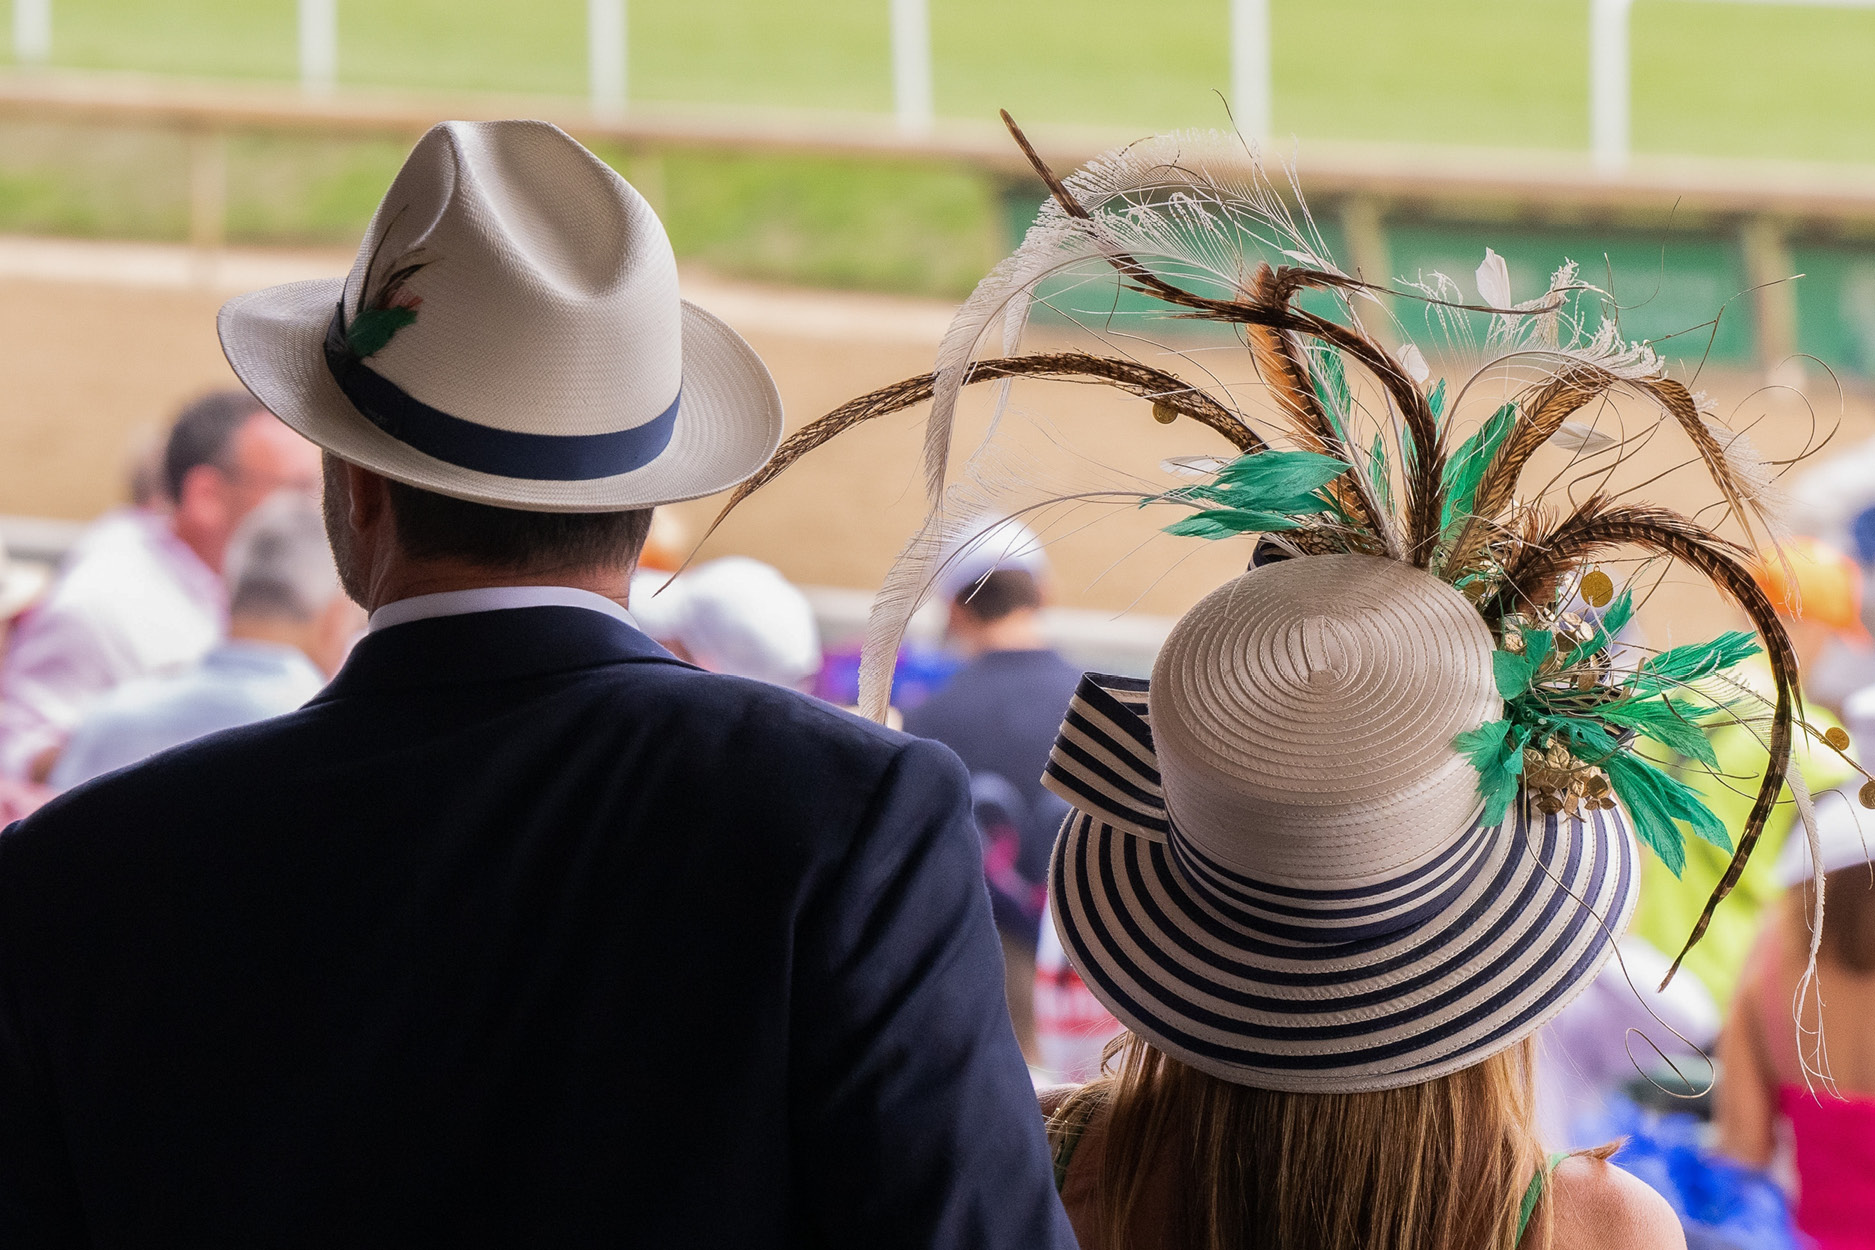 Kentucky derby hats with people watching racetrack